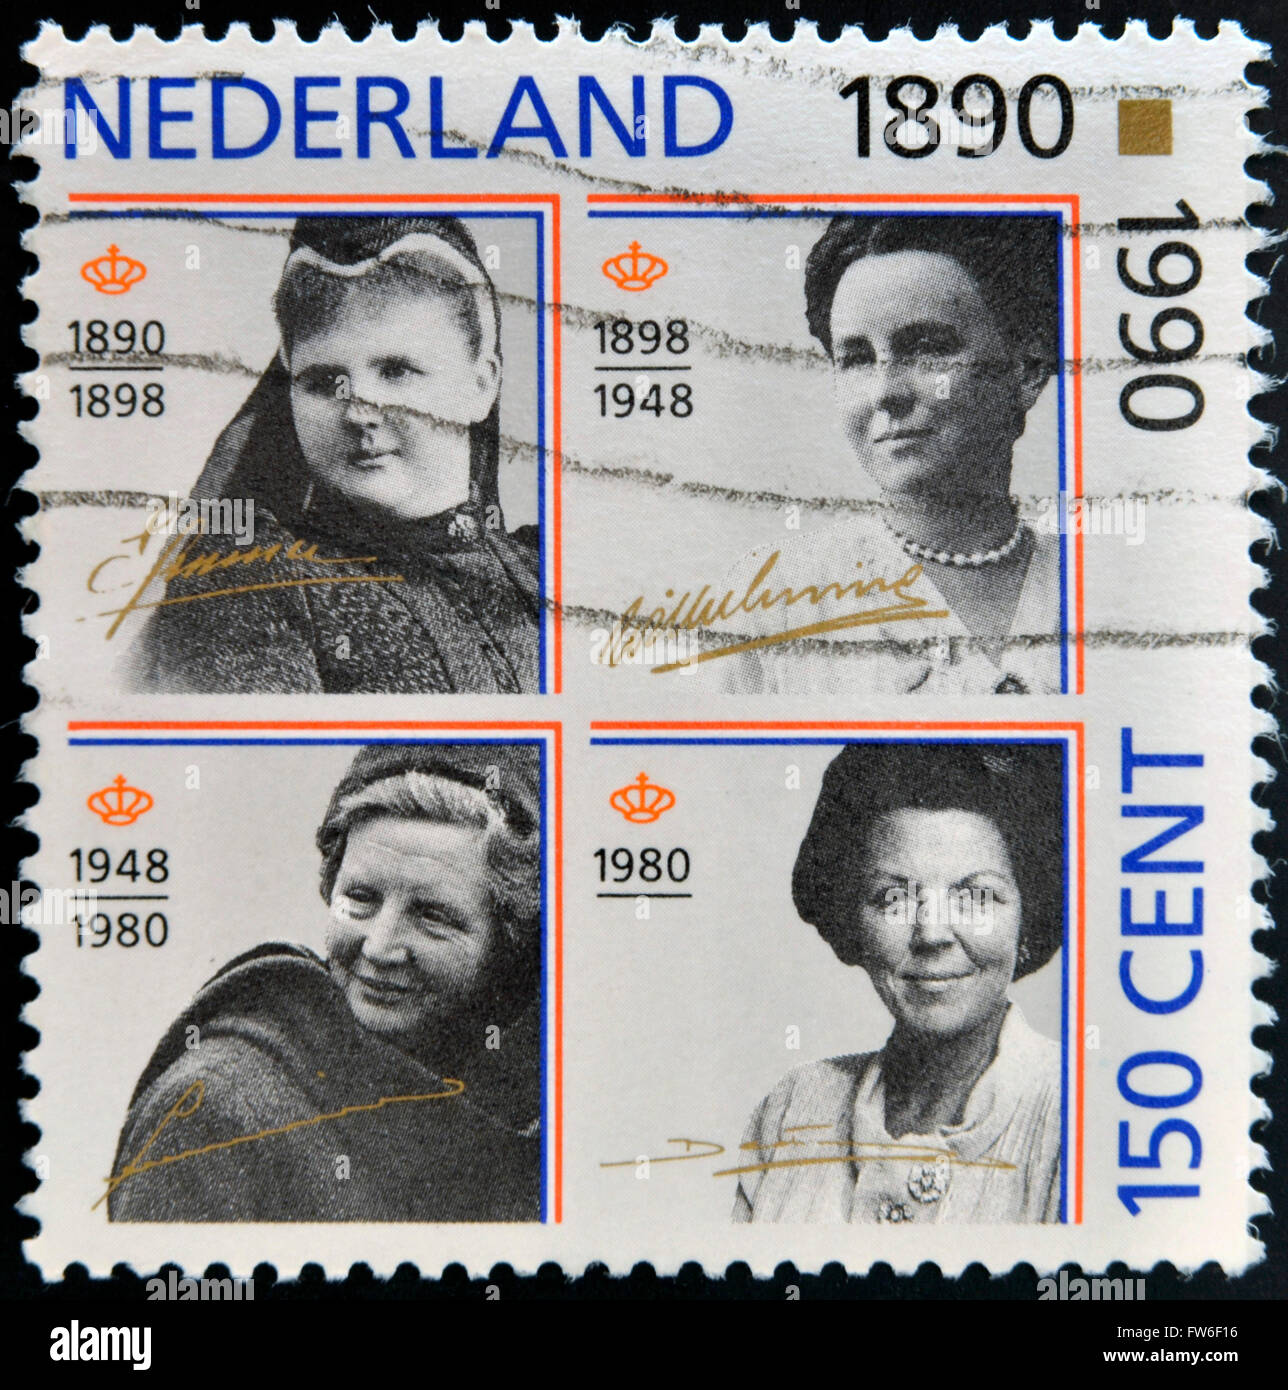 NETHERLANDS - CIRCA 1990: A stamp printed in the Netherlands shows Beatrix of the Netherlands, circa 1990 Stock Photo